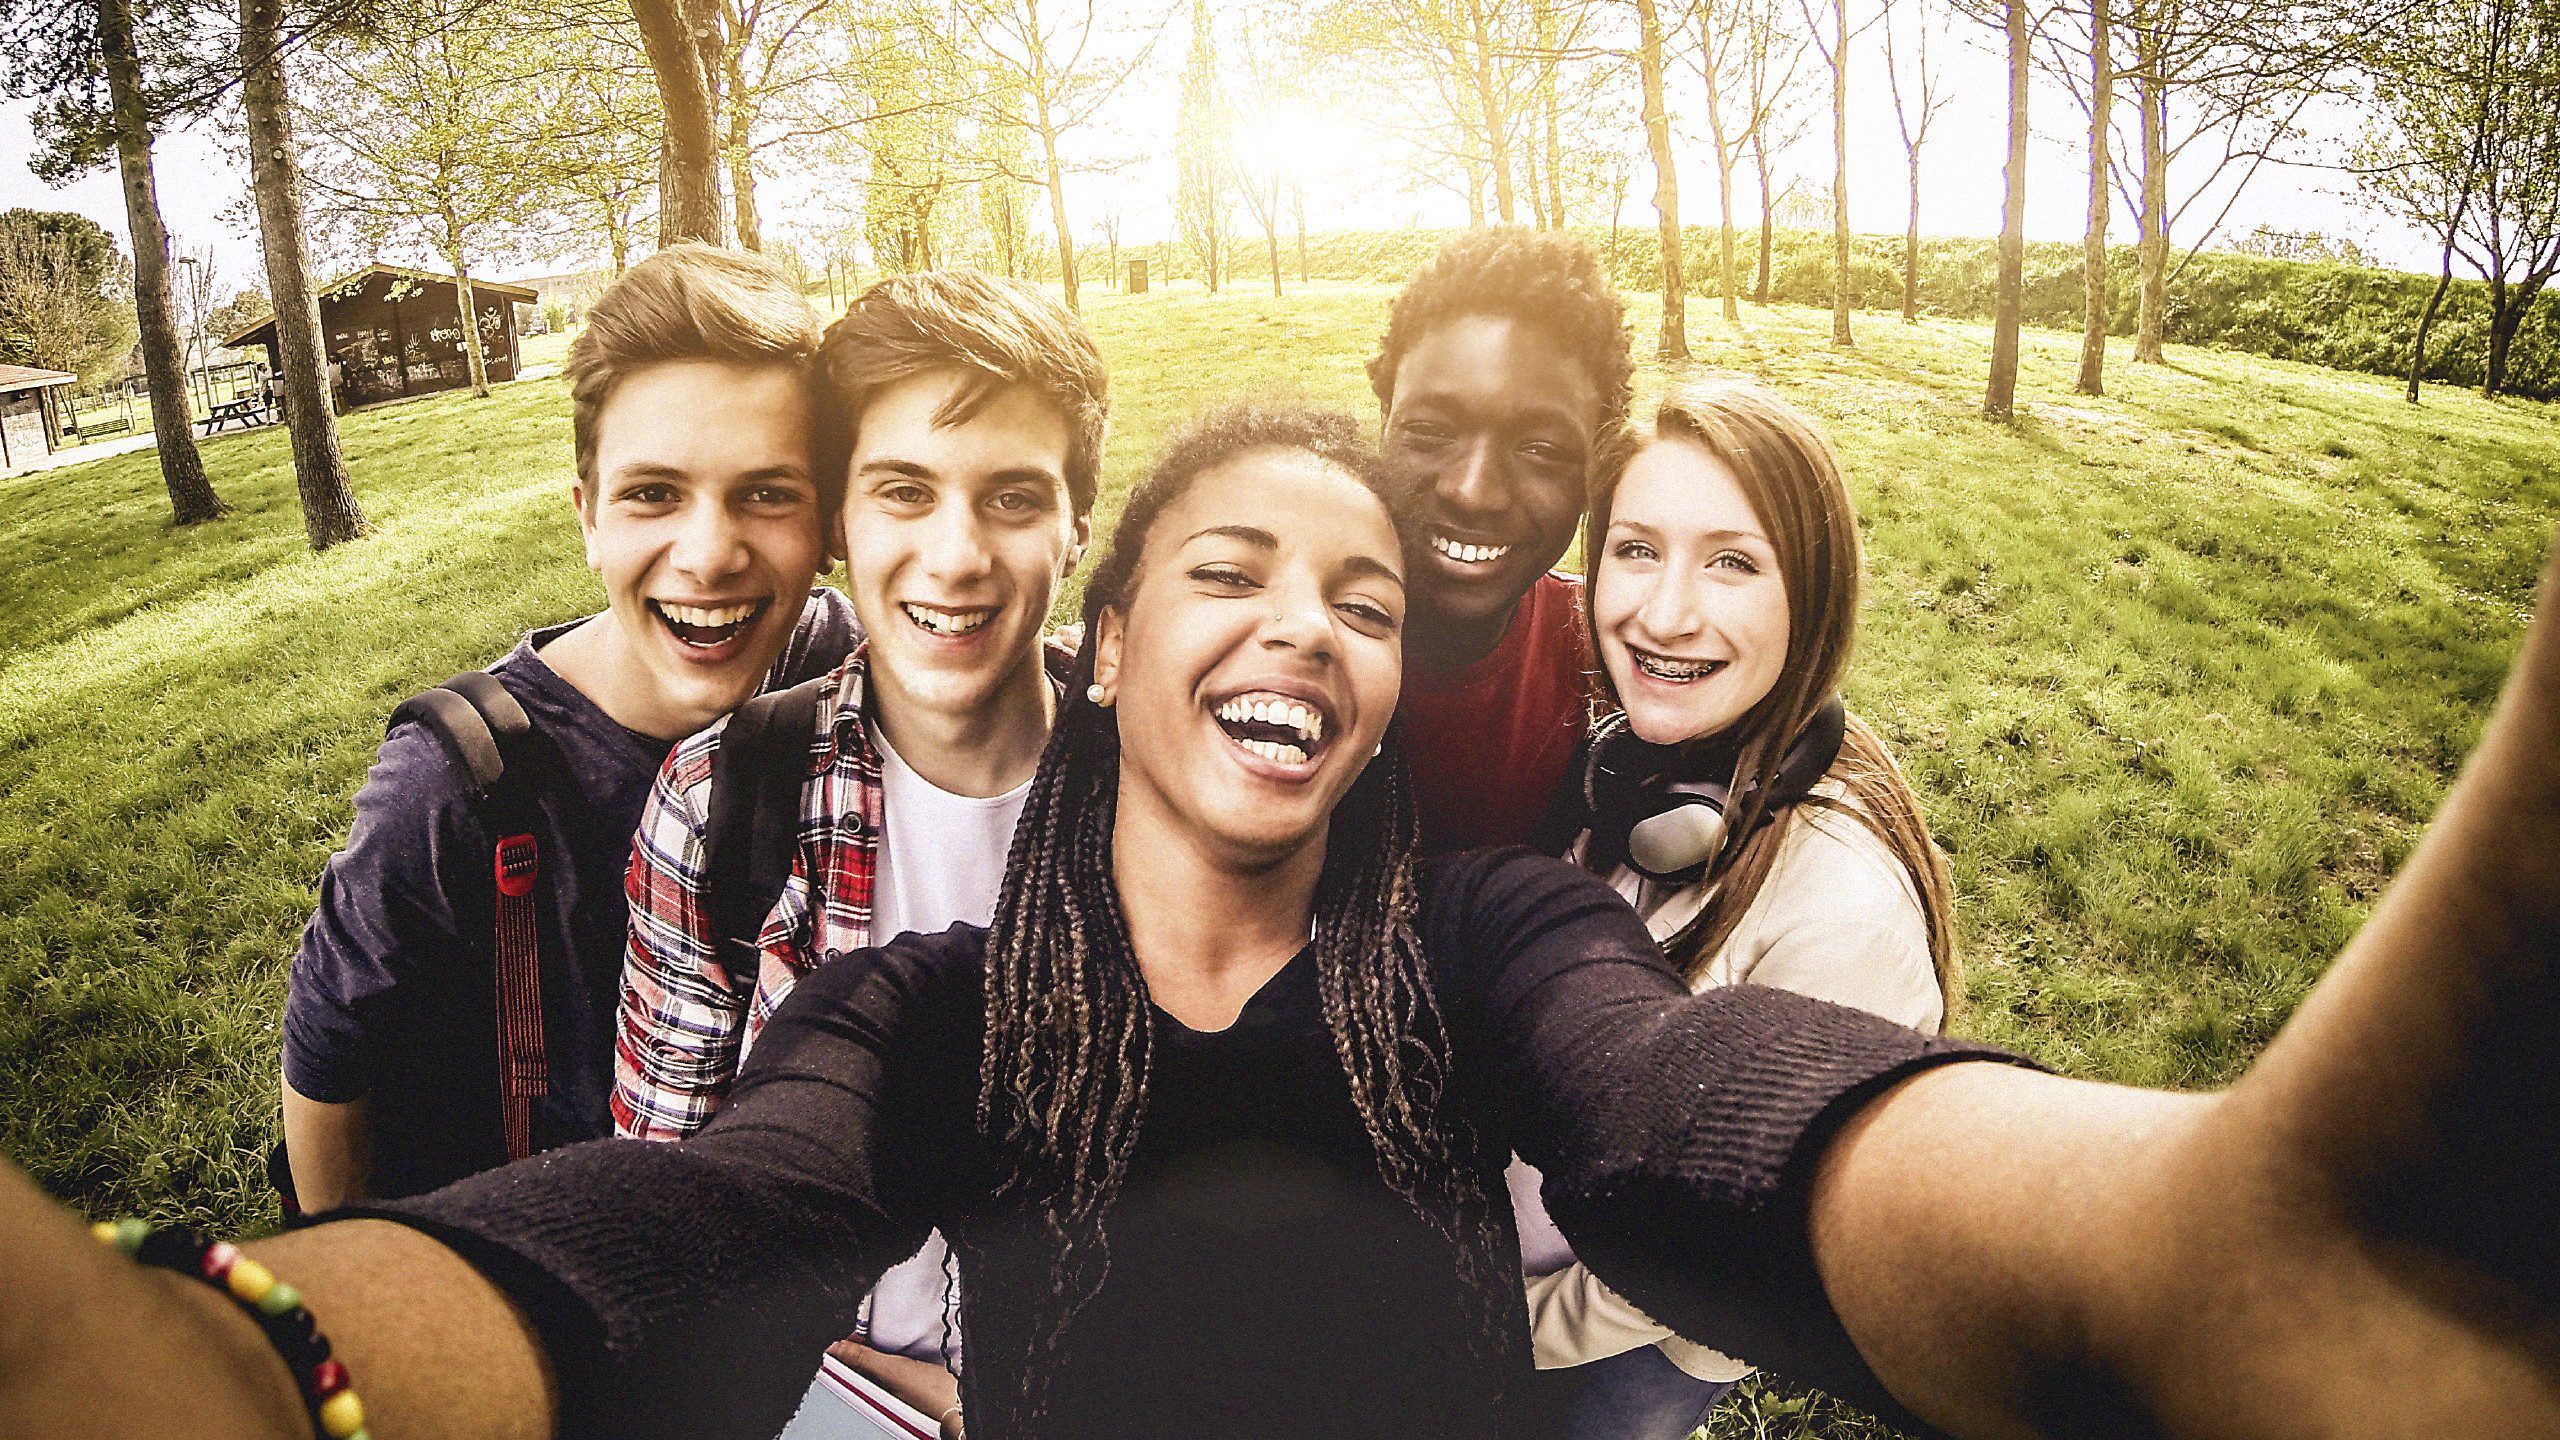 Image is a photo of 5 adolescents, smiling outdoors, holding a globe